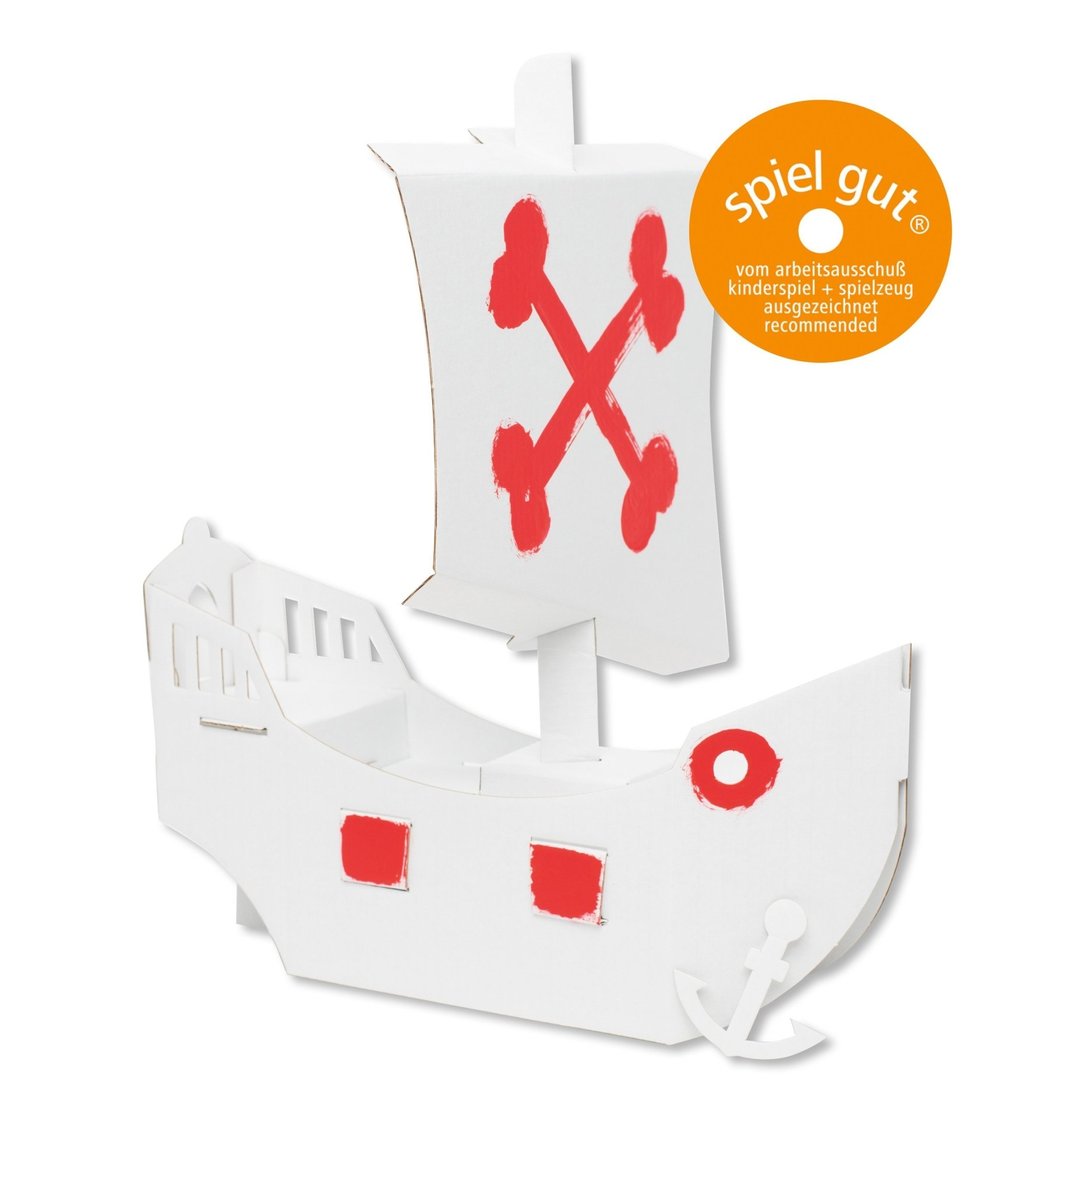 3D Colour-In Animal Kit - Pirate Ship